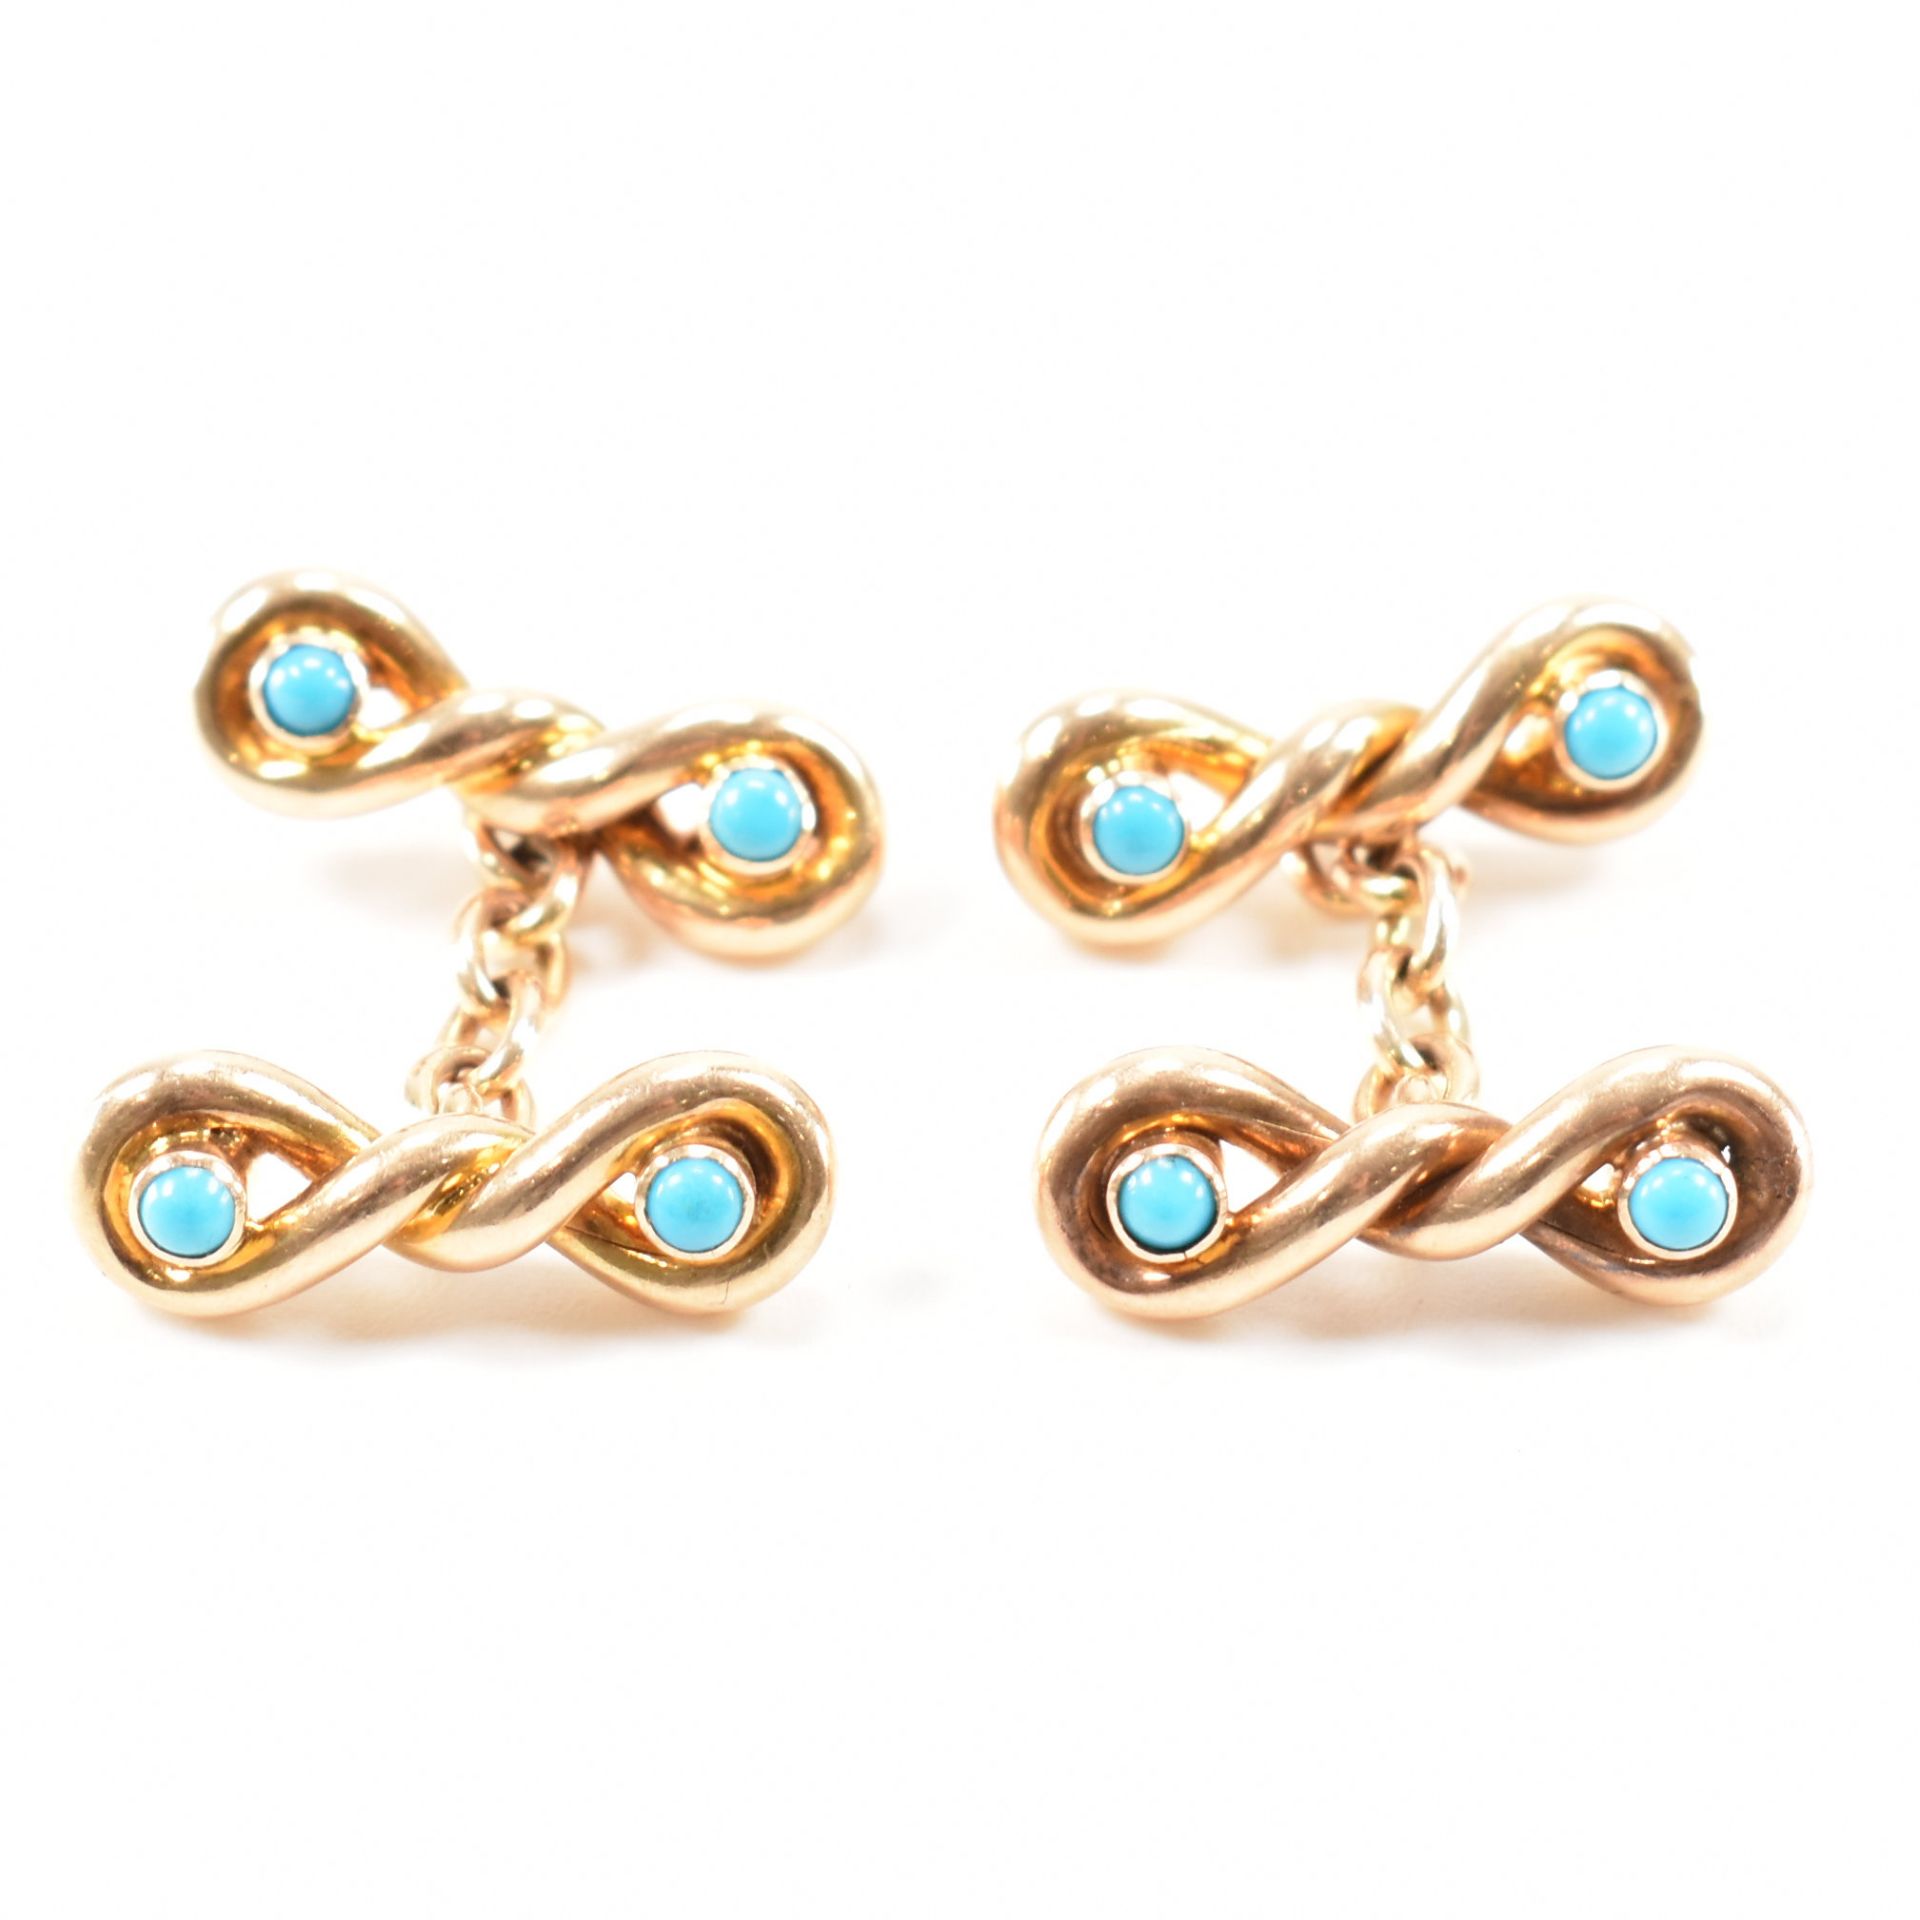 PAIR OF VINTAGE 15CT GOLD & TURQUOISE CUFFLINKS